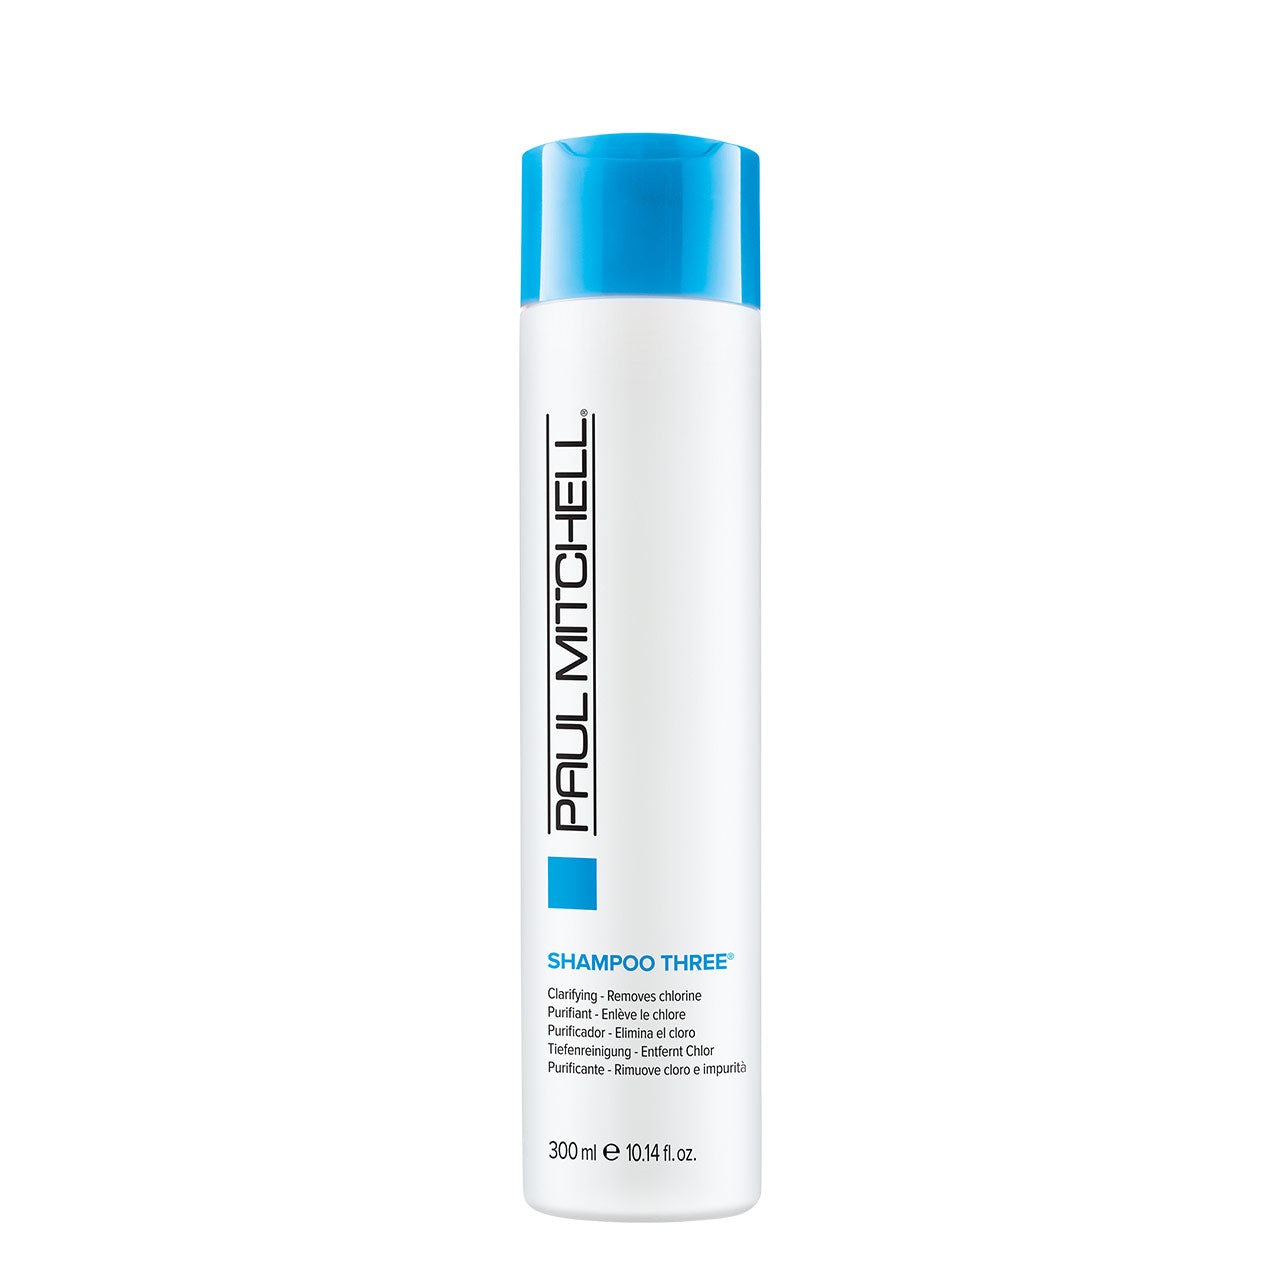 Clarifying Shampoo Three - 300ML - by Paul Mitchell |ProCare Outlet|